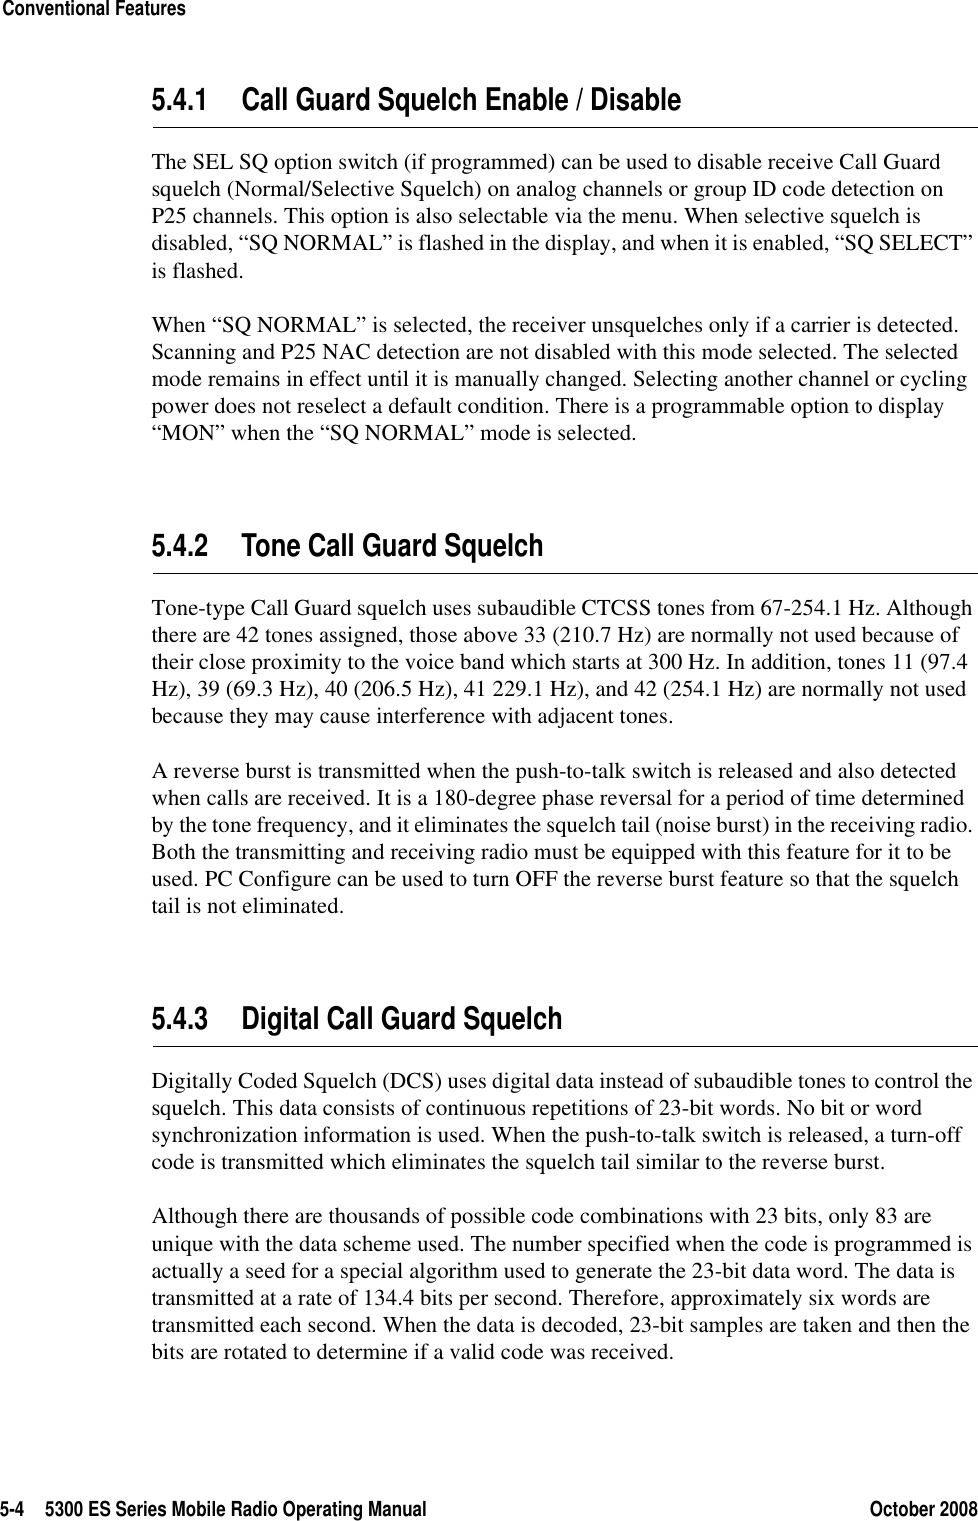 5-4 5300 ES Series Mobile Radio Operating Manual October 2008Conventional Features5.4.1 Call Guard Squelch Enable / DisableThe SEL SQ option switch (if programmed) can be used to disable receive Call Guard squelch (Normal/Selective Squelch) on analog channels or group ID code detection on P25 channels. This option is also selectable via the menu. When selective squelch is disabled, “SQ NORMAL” is flashed in the display, and when it is enabled, “SQ SELECT” is flashed.When “SQ NORMAL” is selected, the receiver unsquelches only if a carrier is detected. Scanning and P25 NAC detection are not disabled with this mode selected. The selected mode remains in effect until it is manually changed. Selecting another channel or cycling power does not reselect a default condition. There is a programmable option to display “MON” when the “SQ NORMAL” mode is selected.5.4.2 Tone Call Guard SquelchTone-type Call Guard squelch uses subaudible CTCSS tones from 67-254.1 Hz. Although there are 42 tones assigned, those above 33 (210.7 Hz) are normally not used because of their close proximity to the voice band which starts at 300 Hz. In addition, tones 11 (97.4 Hz), 39 (69.3 Hz), 40 (206.5 Hz), 41 229.1 Hz), and 42 (254.1 Hz) are normally not used because they may cause interference with adjacent tones.A reverse burst is transmitted when the push-to-talk switch is released and also detected when calls are received. It is a 180-degree phase reversal for a period of time determined by the tone frequency, and it eliminates the squelch tail (noise burst) in the receiving radio. Both the transmitting and receiving radio must be equipped with this feature for it to be used. PC Configure can be used to turn OFF the reverse burst feature so that the squelch tail is not eliminated.5.4.3 Digital Call Guard SquelchDigitally Coded Squelch (DCS) uses digital data instead of subaudible tones to control the squelch. This data consists of continuous repetitions of 23-bit words. No bit or word synchronization information is used. When the push-to-talk switch is released, a turn-off code is transmitted which eliminates the squelch tail similar to the reverse burst.Although there are thousands of possible code combinations with 23 bits, only 83 are unique with the data scheme used. The number specified when the code is programmed is actually a seed for a special algorithm used to generate the 23-bit data word. The data is transmitted at a rate of 134.4 bits per second. Therefore, approximately six words are transmitted each second. When the data is decoded, 23-bit samples are taken and then the bits are rotated to determine if a valid code was received.